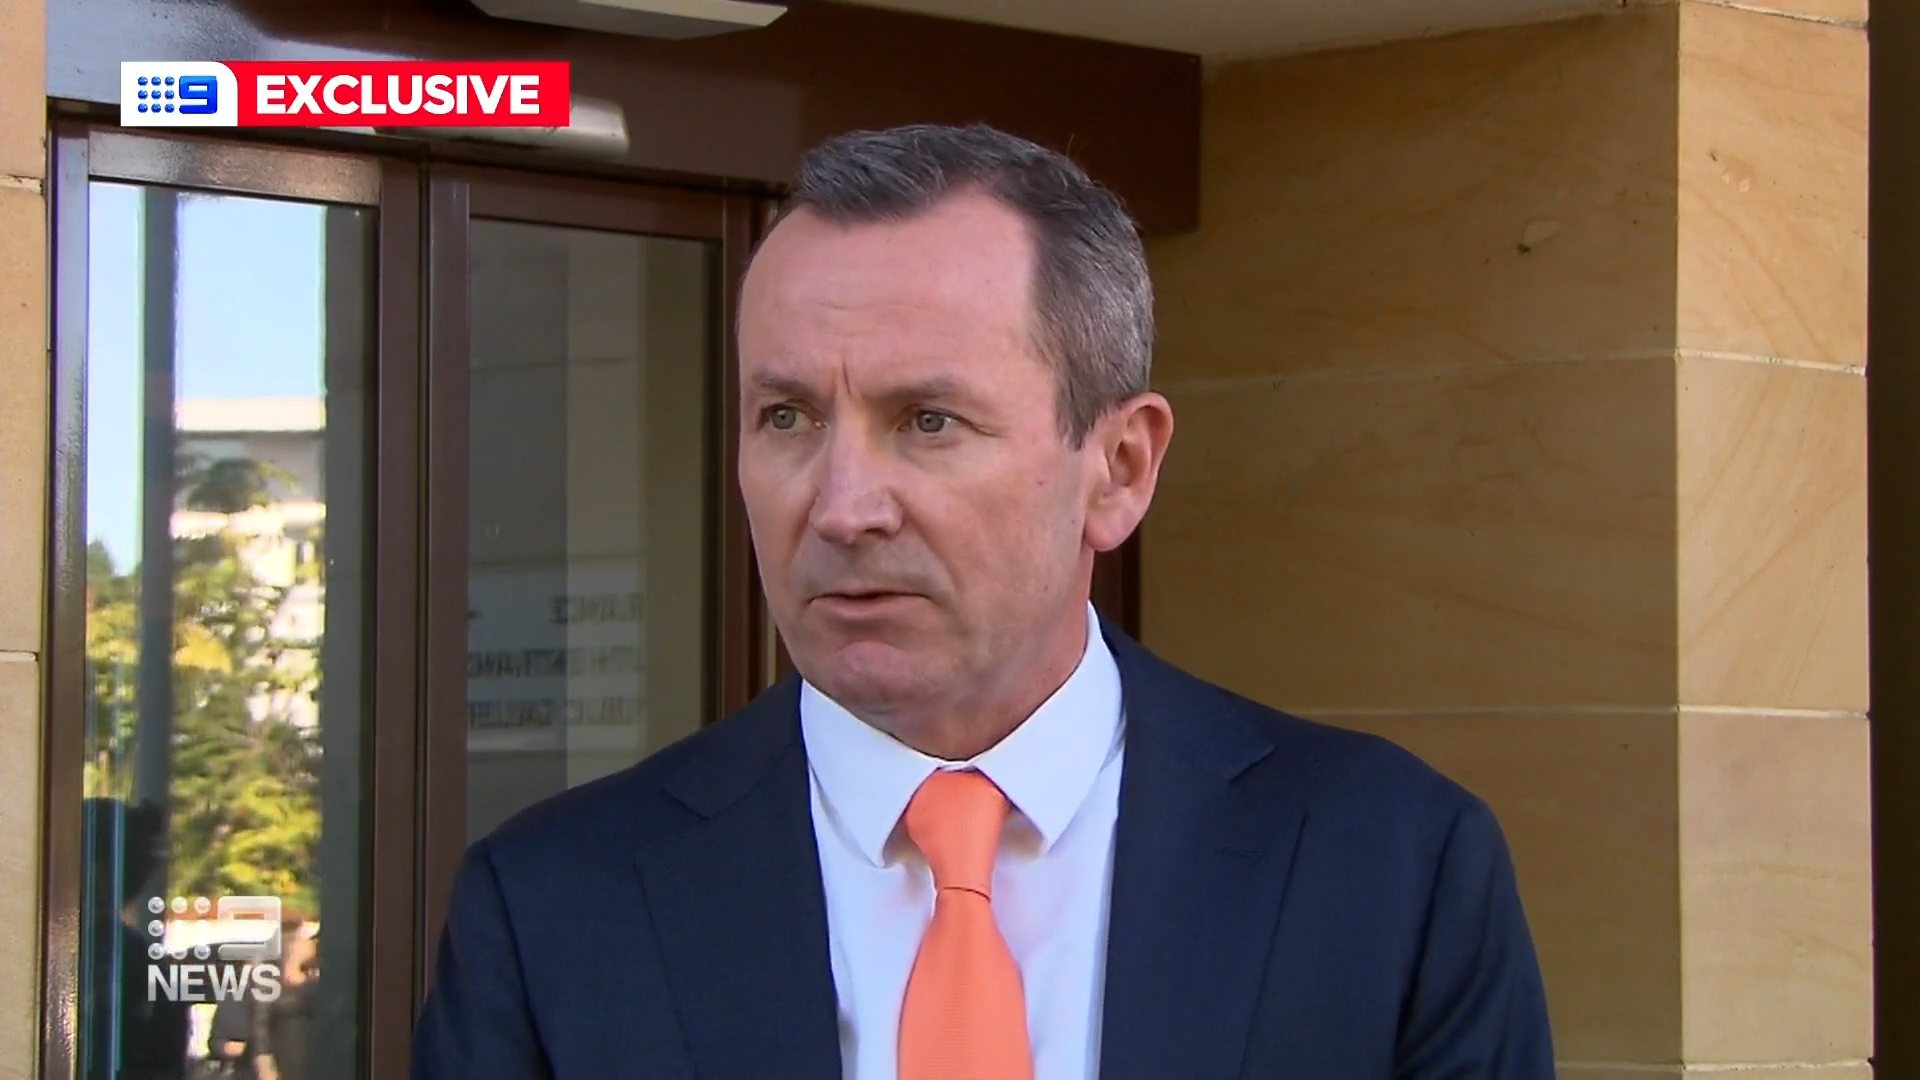 WA Premier Mark McGowan has supported calls to ban nangs after the addictive party gas left a young Perth woman unable to walk.